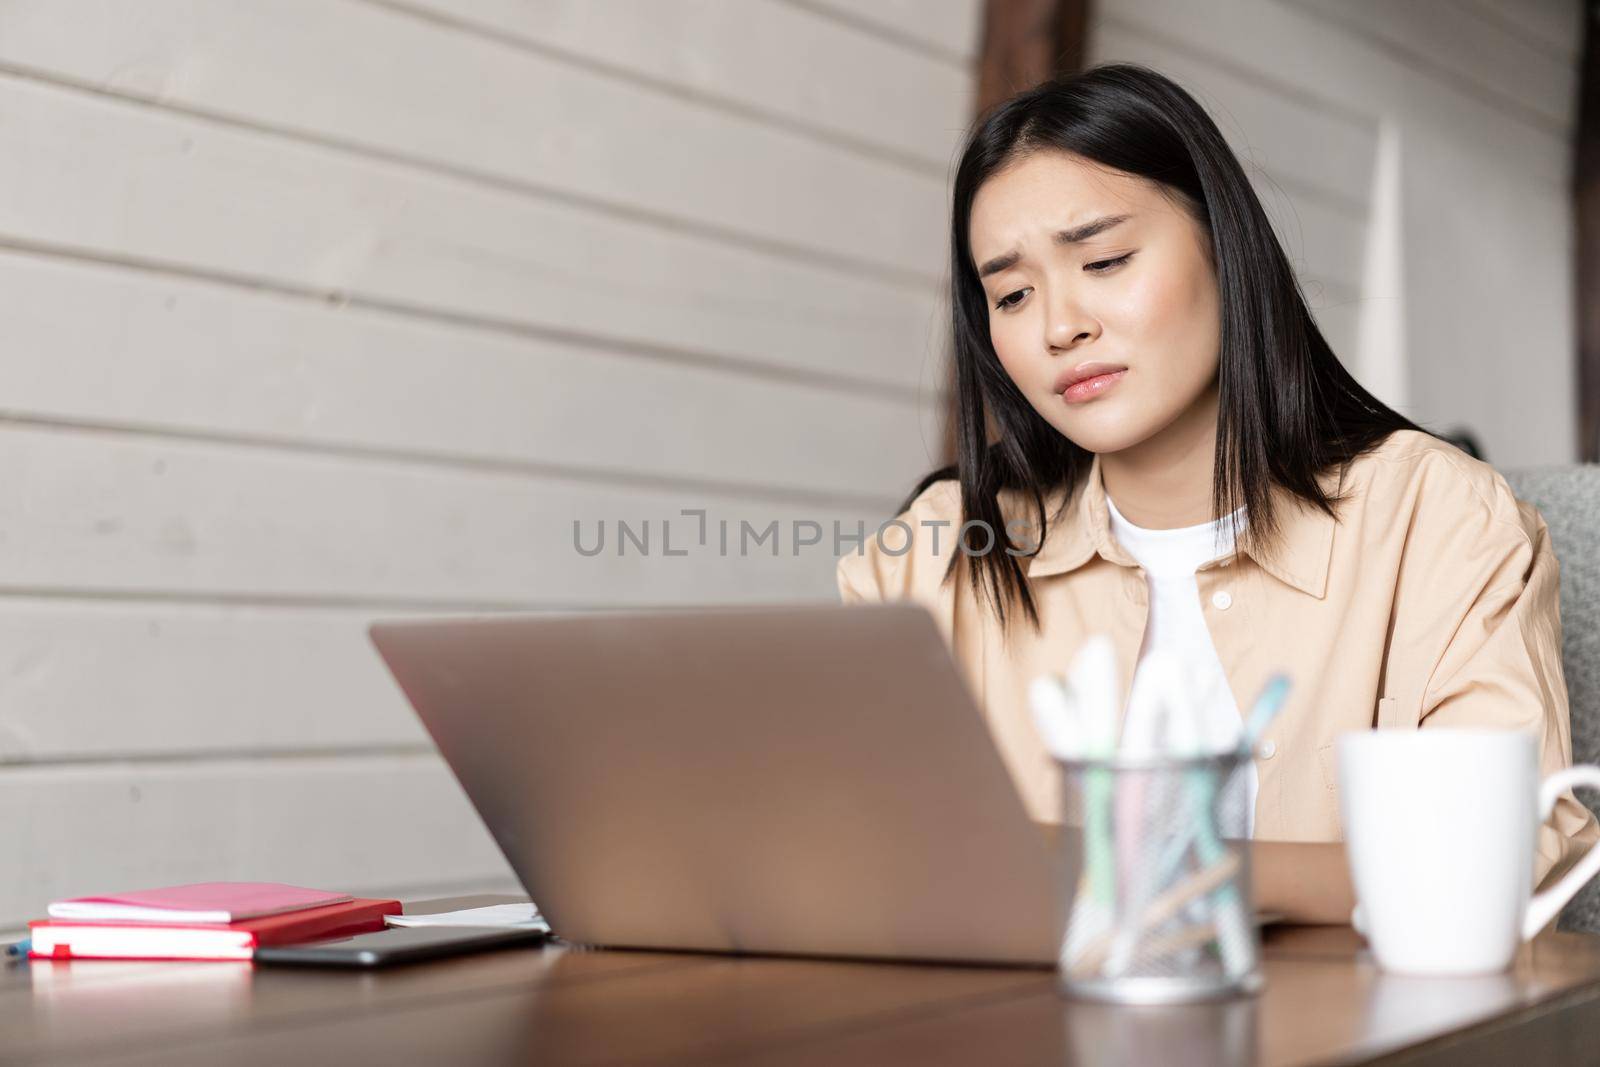 Sad and tired asian girl looking disappointed at laptop screen, bored of studying, watching something boring on computer.